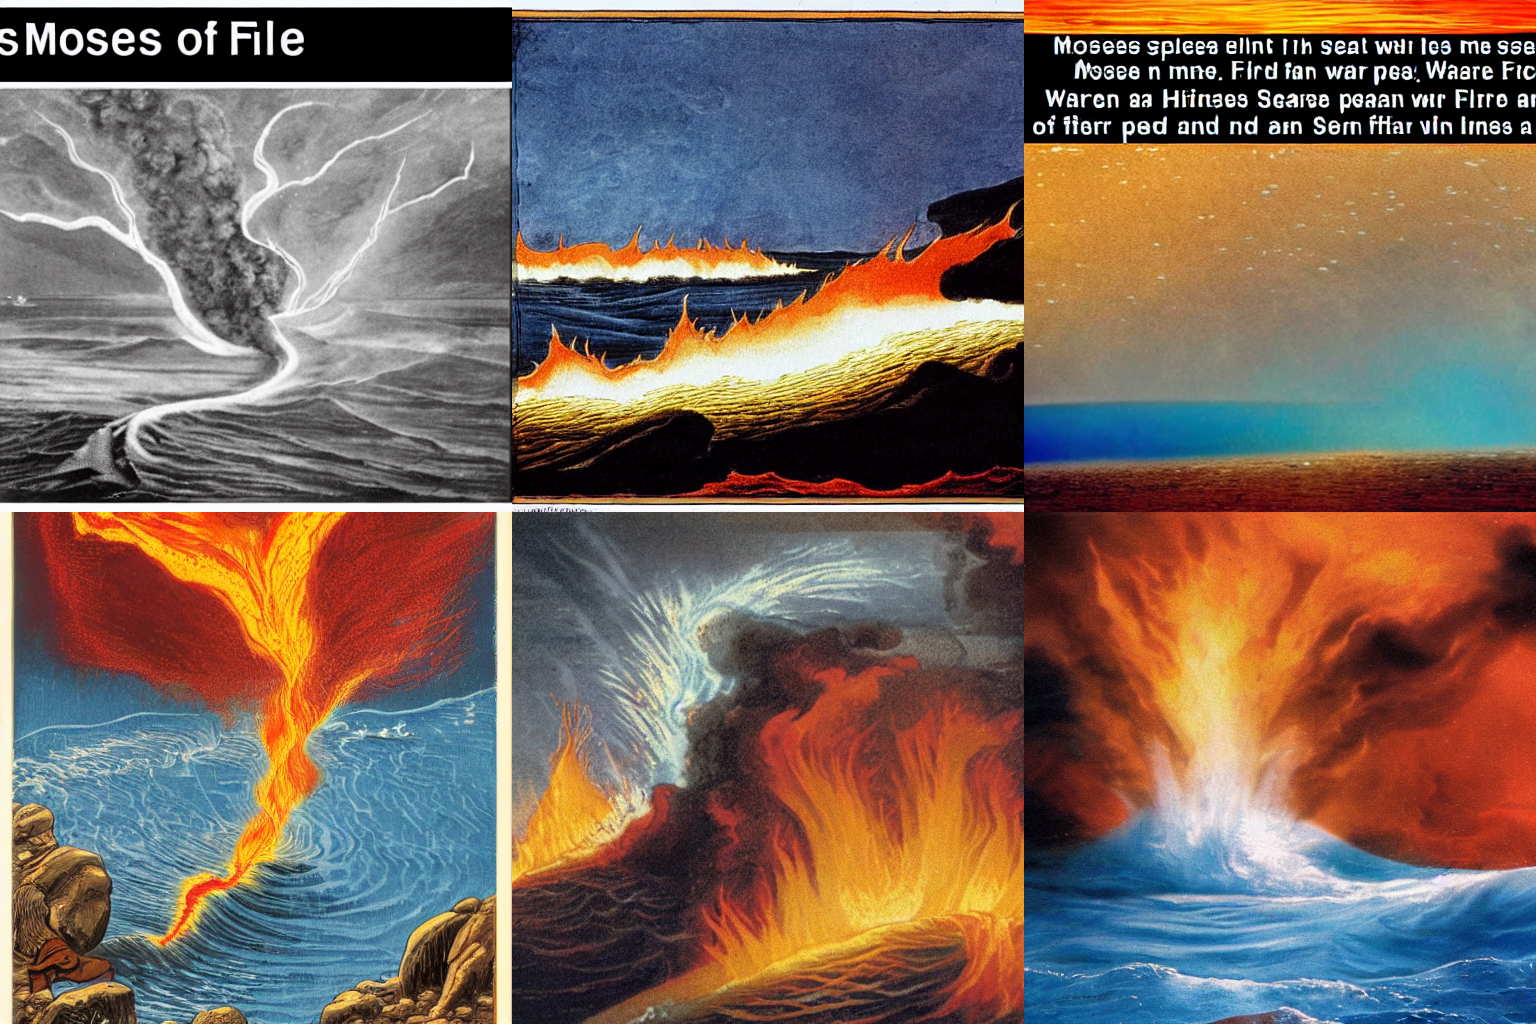 Moses splits the sea that one part of the sea is made of fire and another part is Water